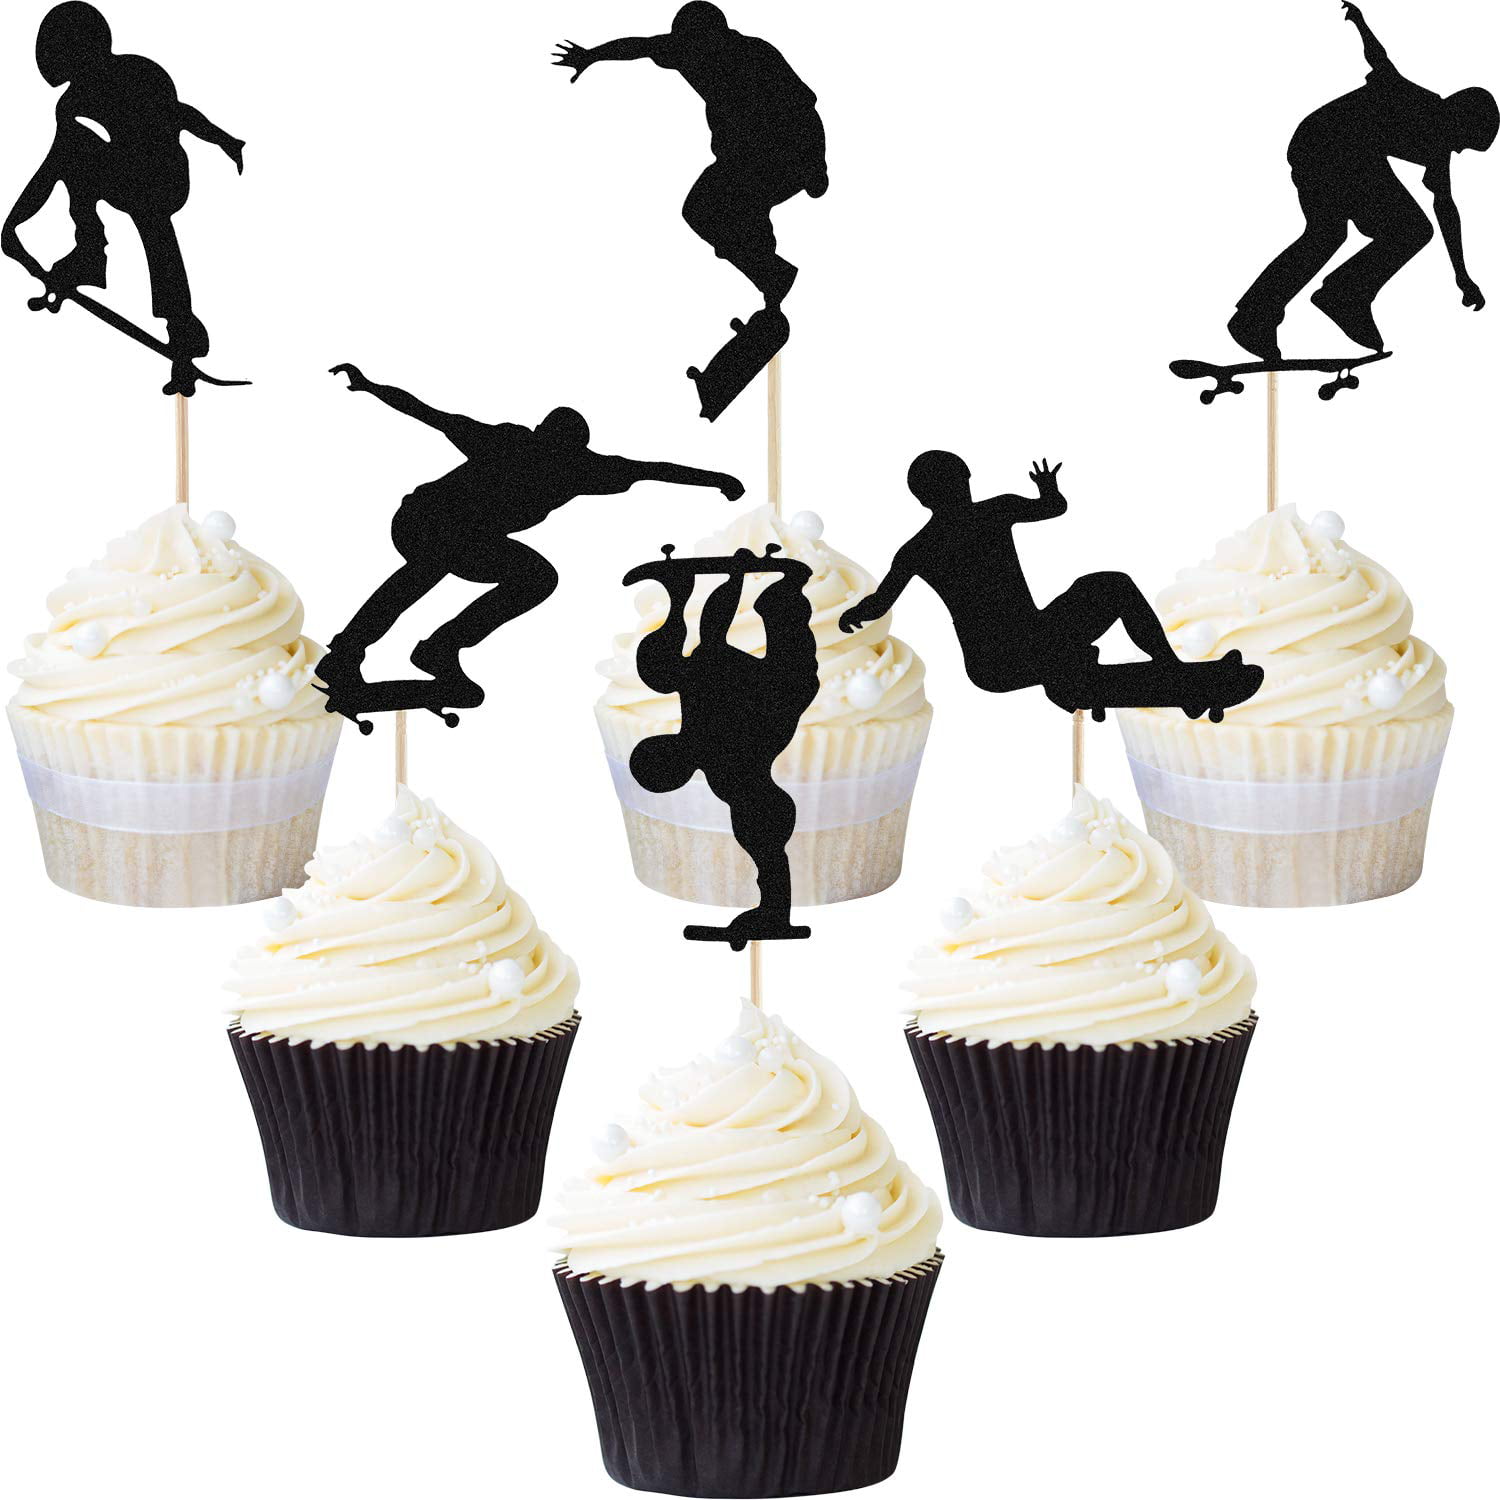 Fashion Wedding Party Cake Topper Cupcake Topper Decoration Supplies 